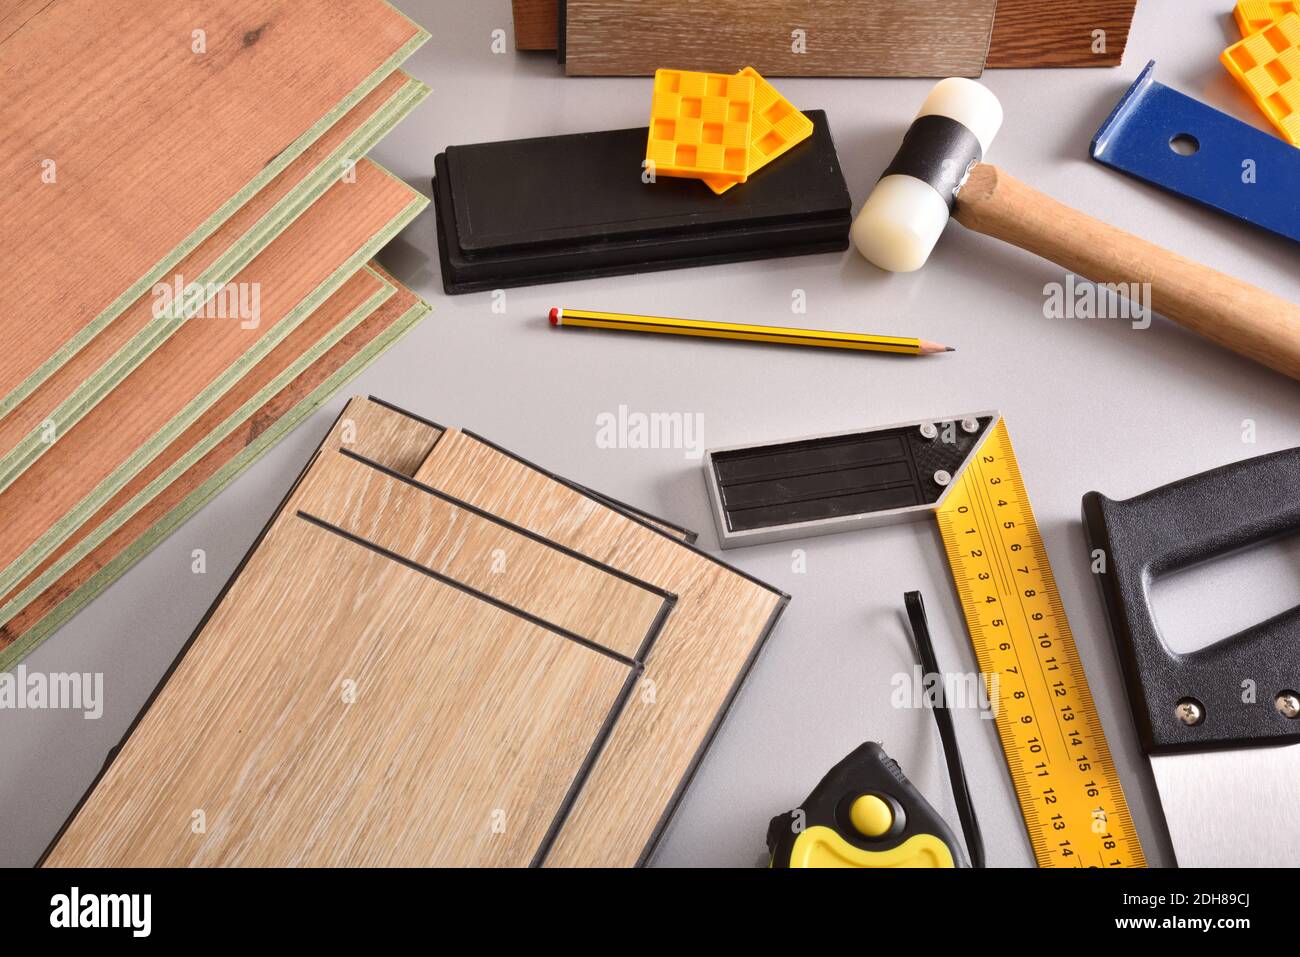 laminated flooring and assorted tools for placement on a gray table. Elevated view. Horizontal composition. Stock Photo